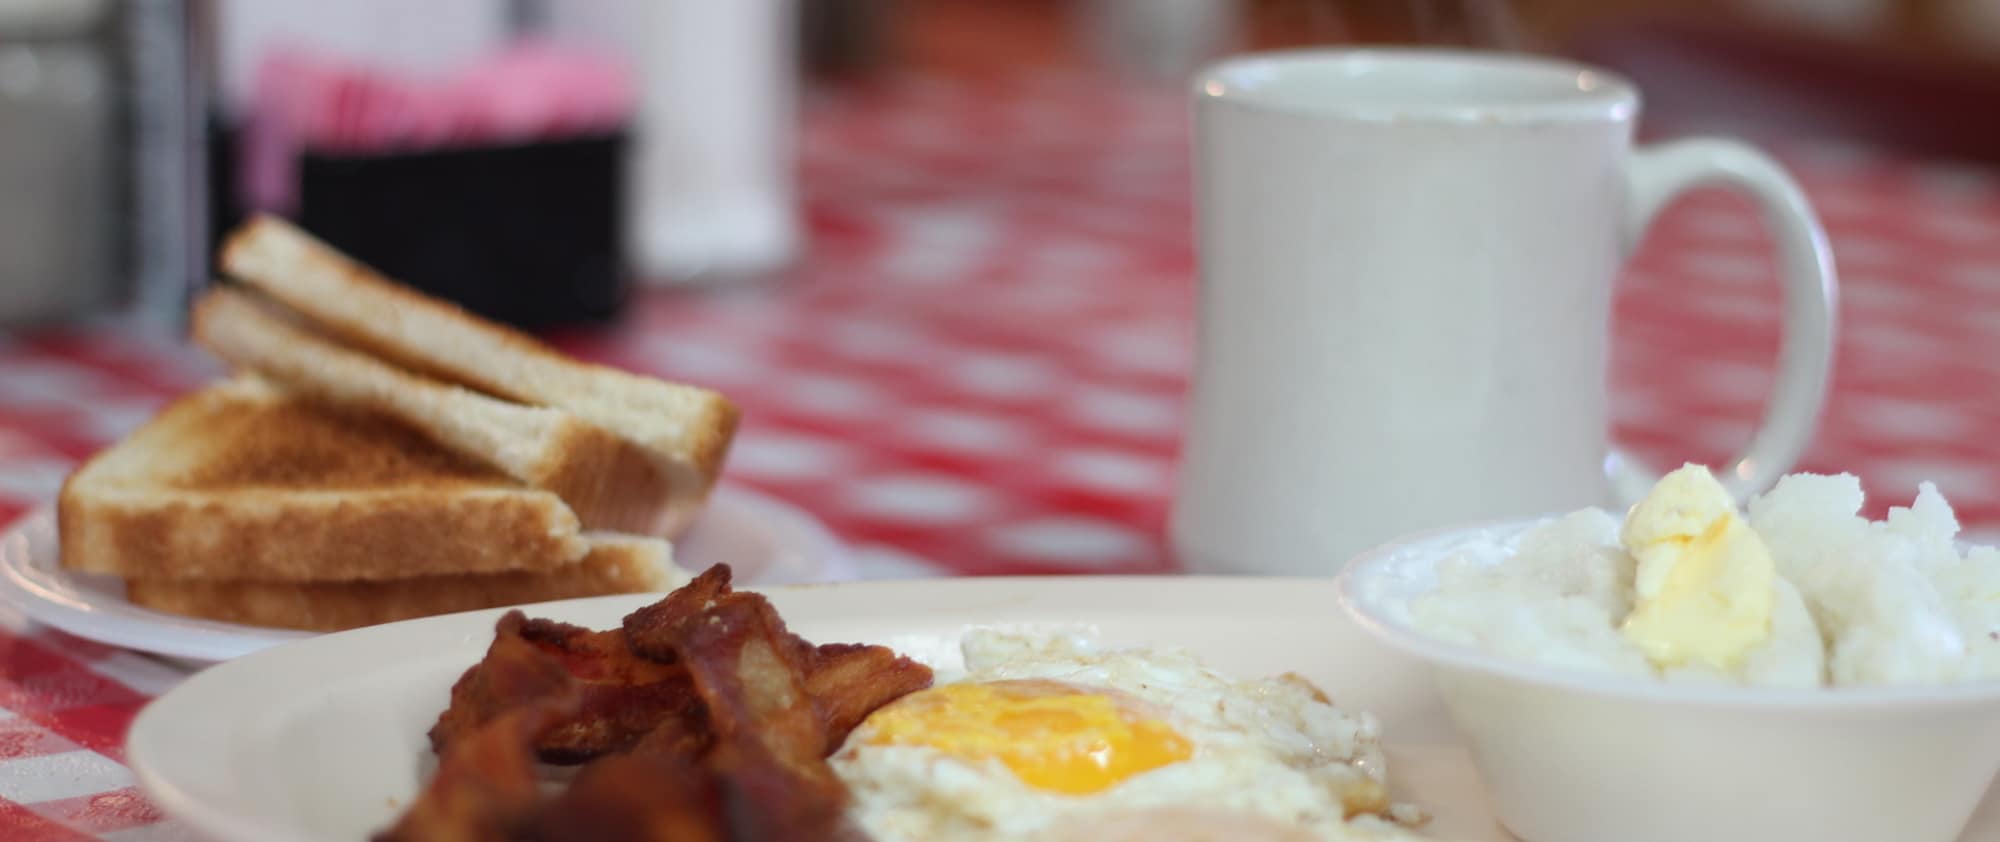 Nothing Could Be Finer: A Breakfast Tour of Spartanburg